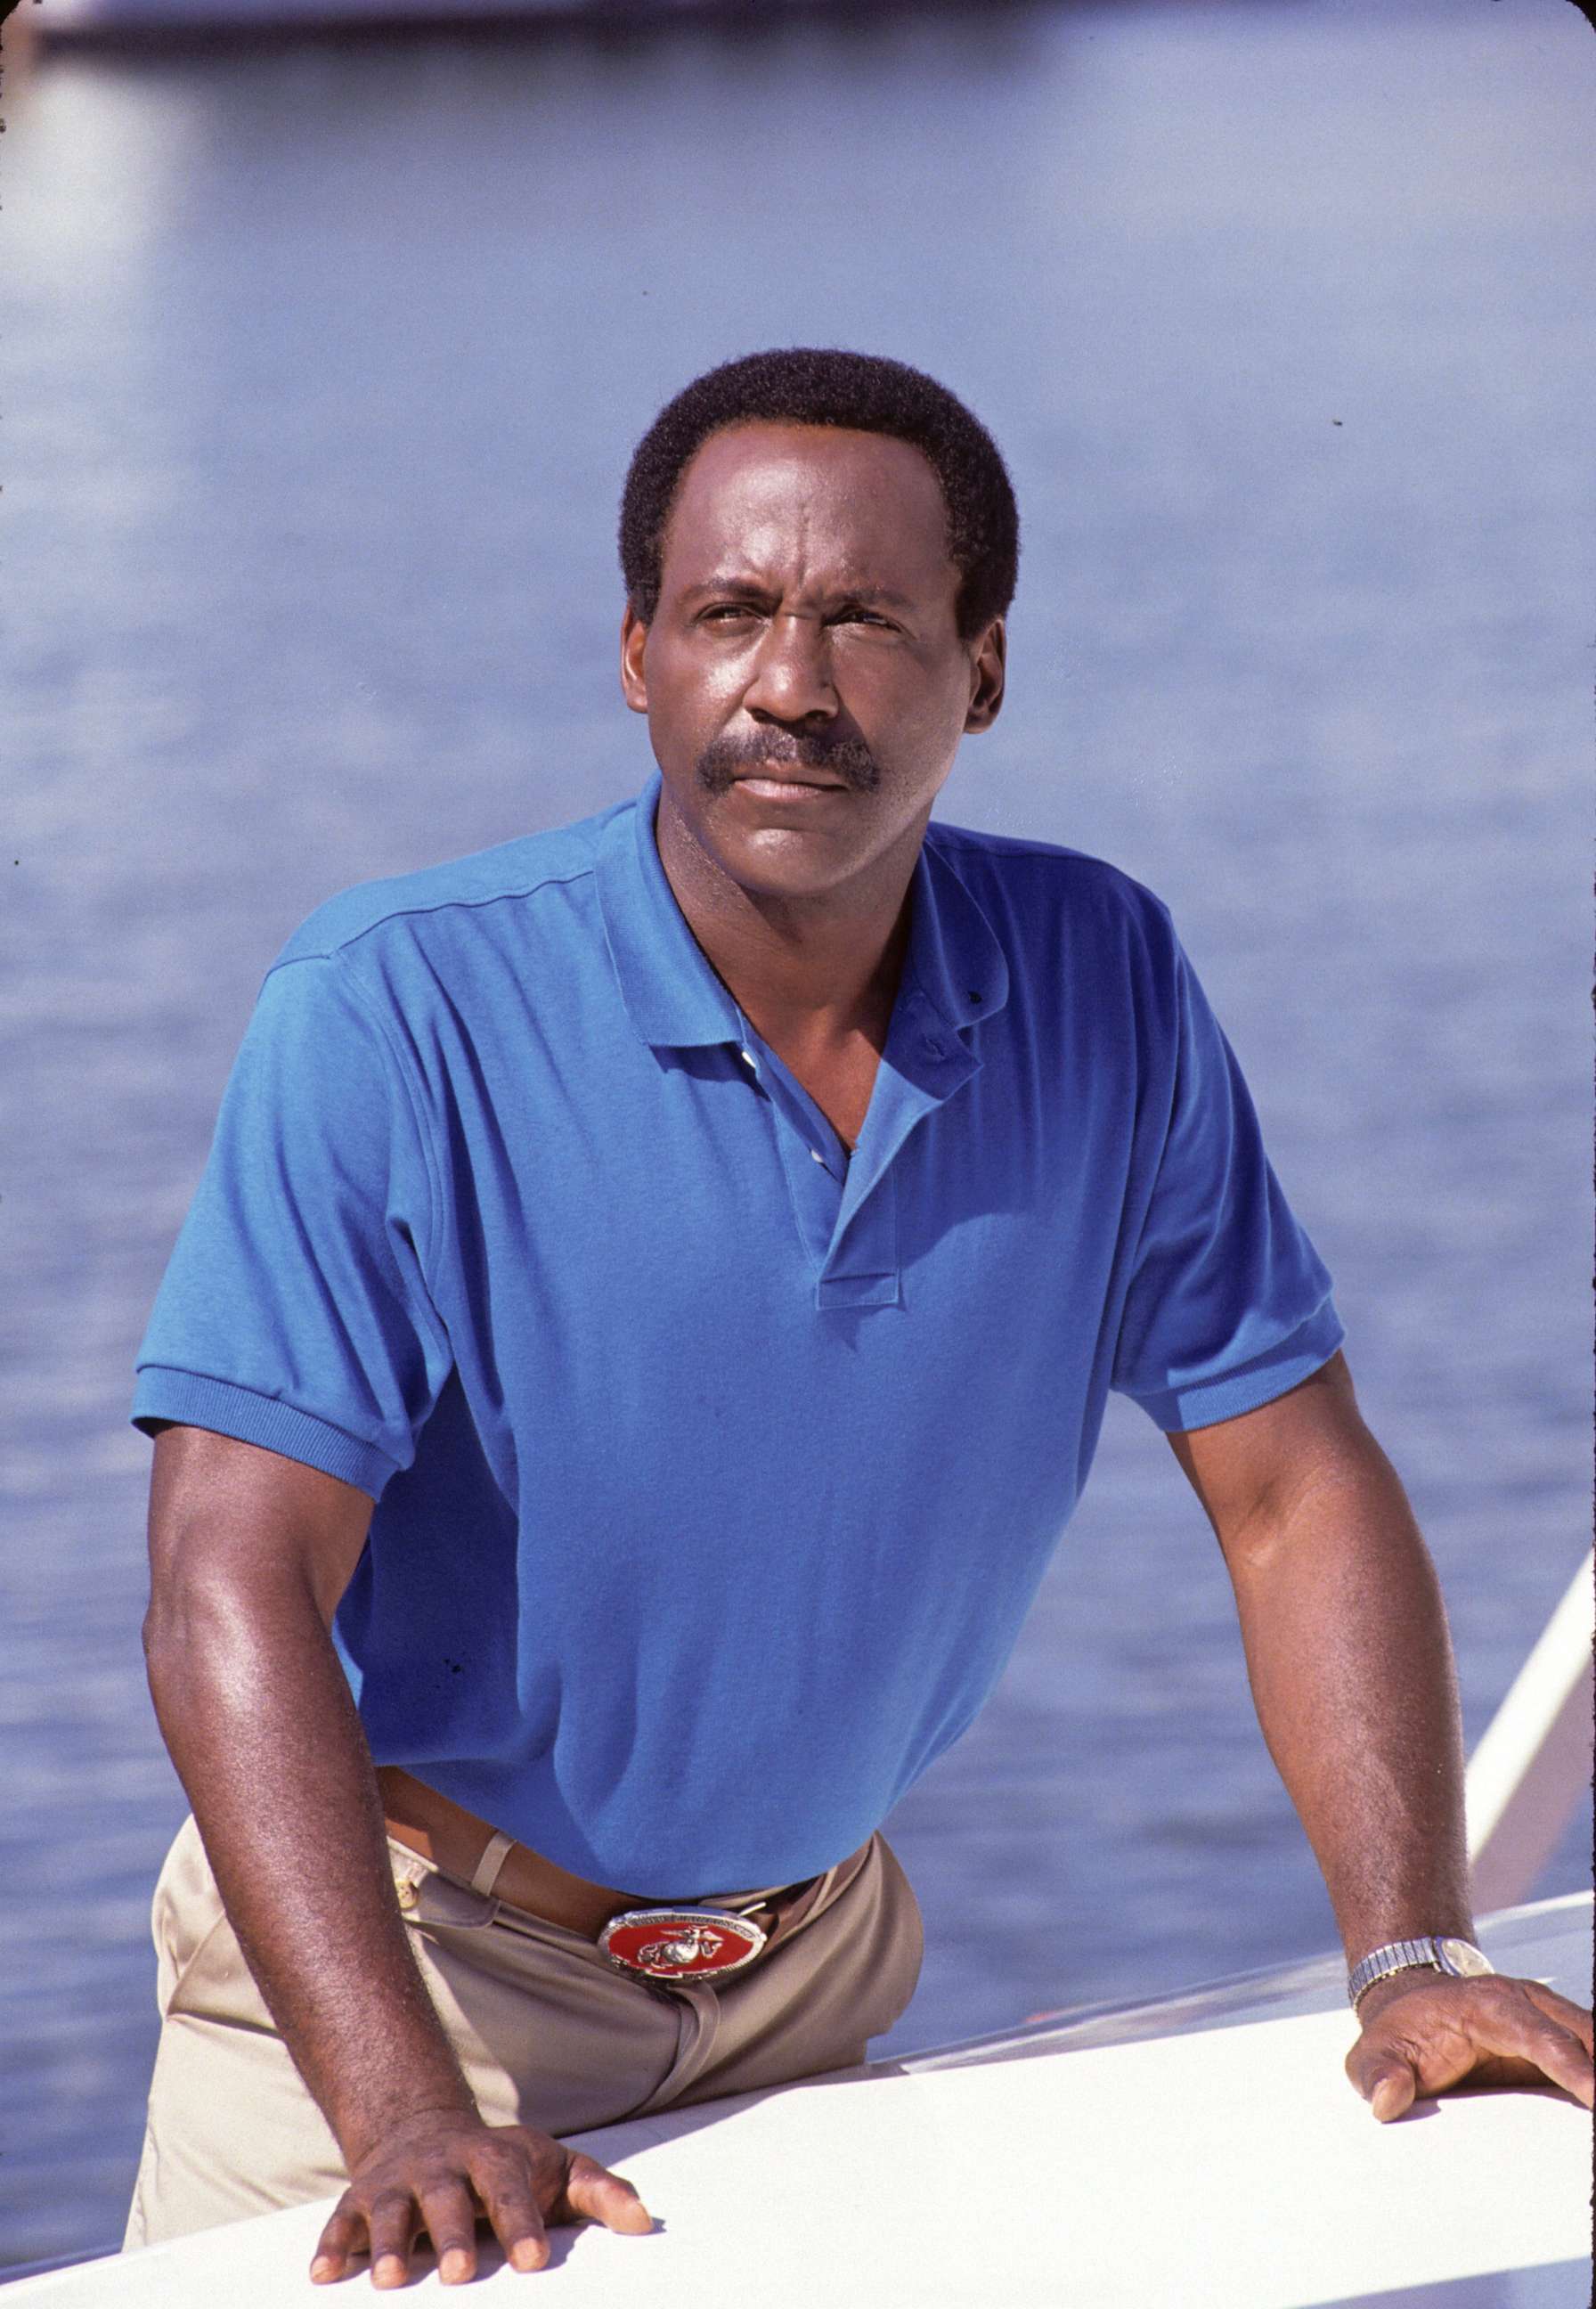 PHOTO: Richard Roundtree in the "Tough Boys" episode of "MacGyver" (Photo: ABC Archives)